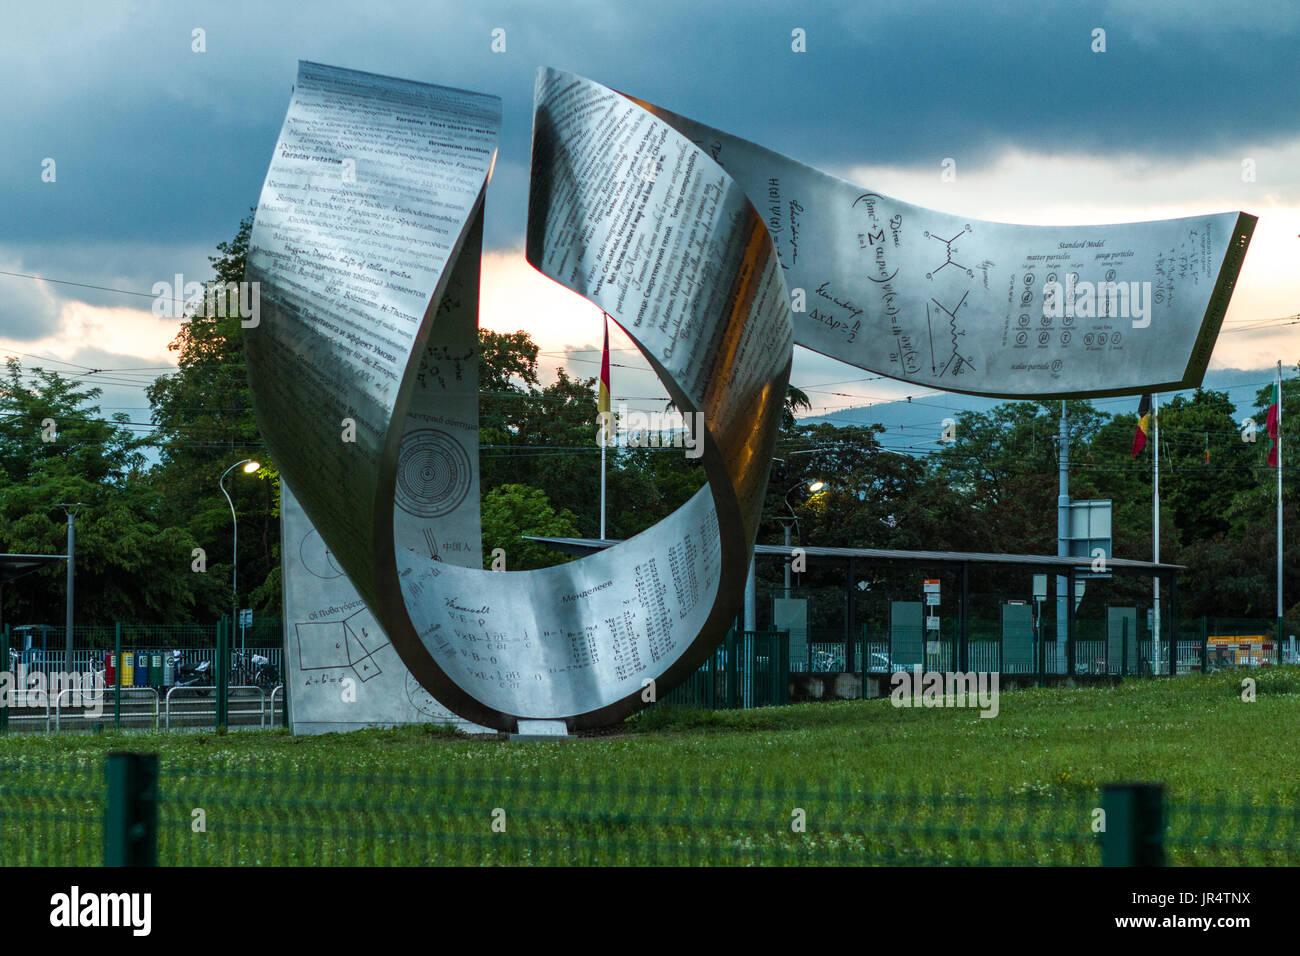 GENEVA, SWITZERLAND - JUNE 8, 2016: The Globe of Science & Innovation in CERN research center, home of Large Hadron Collider (LHC). The sculpture was  Stock Photo